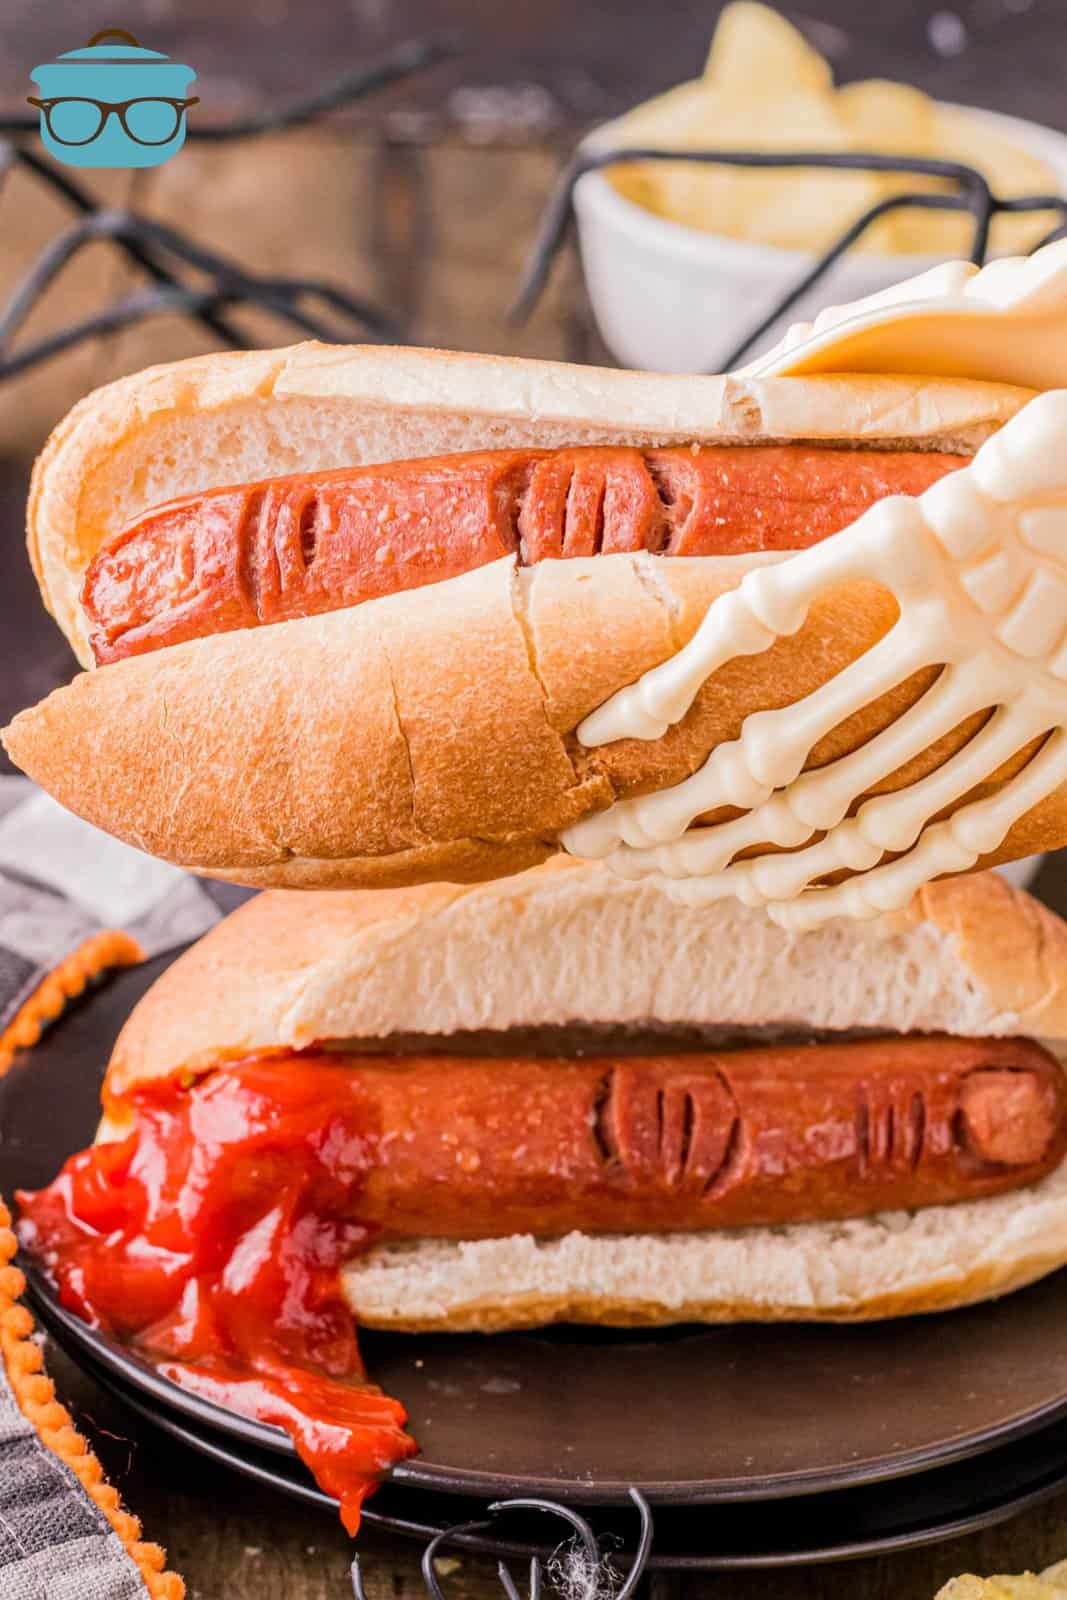 Halloween Hot Dog Fingers in buns with a skeleton hand holding one up.